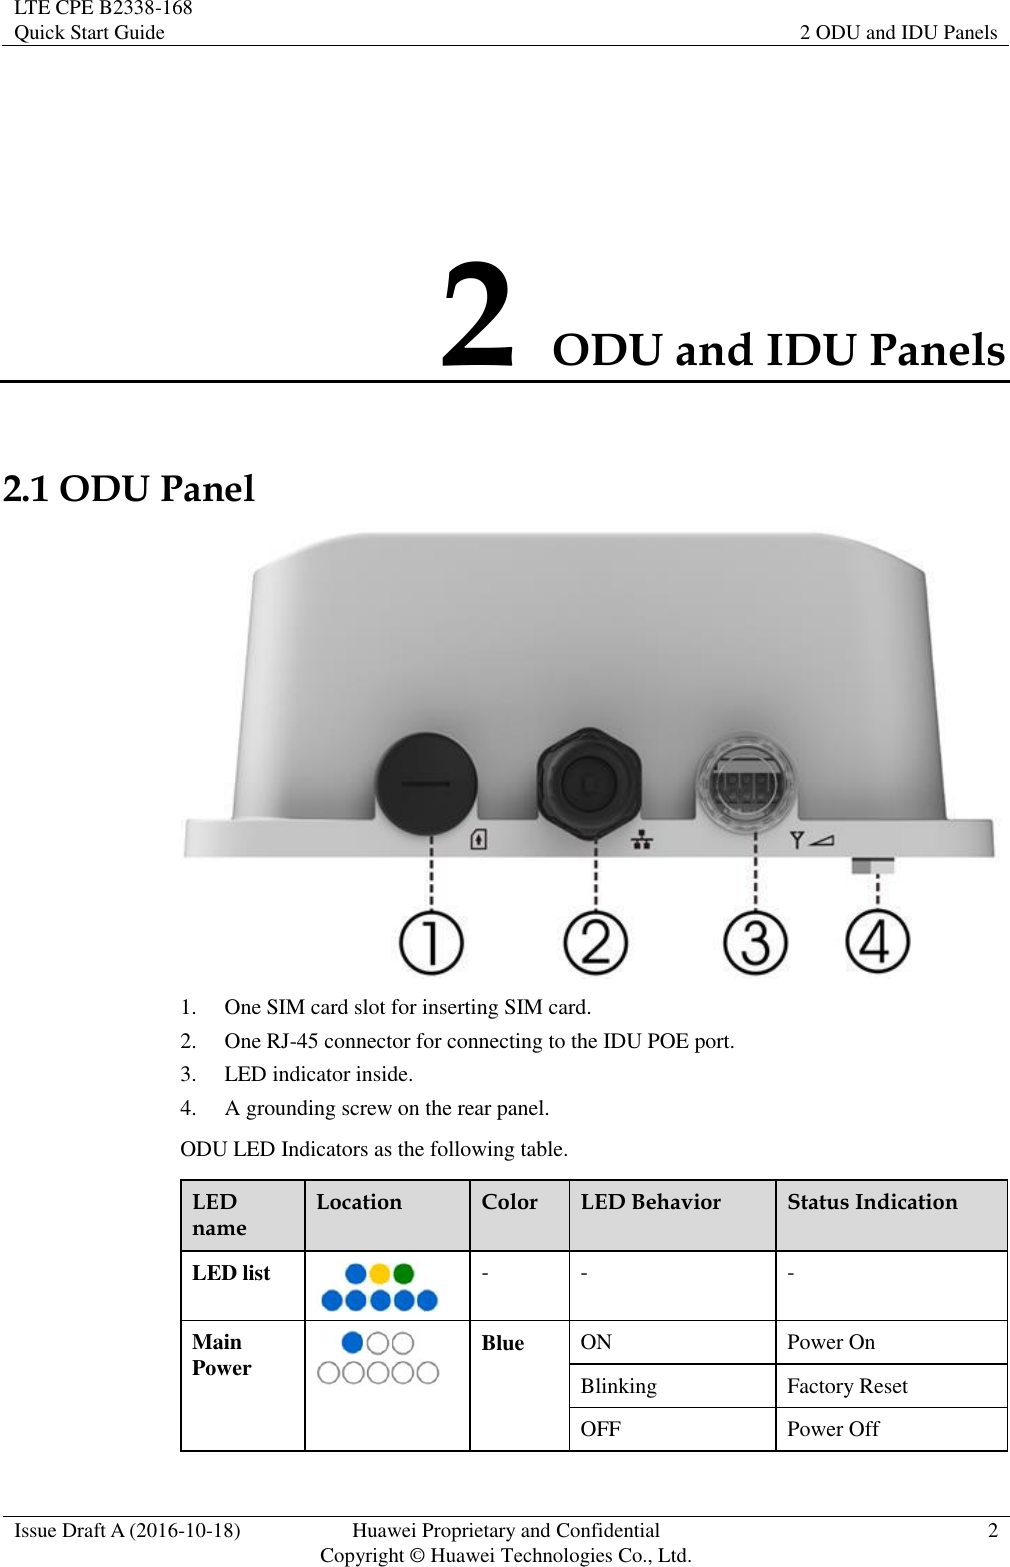 LTE CPE B2338-168   Quick Start Guide 2 ODU and IDU Panels  Issue Draft A (2016-10-18) Huawei Proprietary and Confidential                                     Copyright ©  Huawei Technologies Co., Ltd. 2  2 ODU and IDU Panels 2.1 ODU Panel  1. One SIM card slot for inserting SIM card. 2. One RJ-45 connector for connecting to the IDU POE port. 3. LED indicator inside. 4. A grounding screw on the rear panel. ODU LED Indicators as the following table. LED name Location Color LED Behavior Status Indication LED list  - - - Main Power  Blue ON Power On Blinking Factory Reset OFF Power Off 